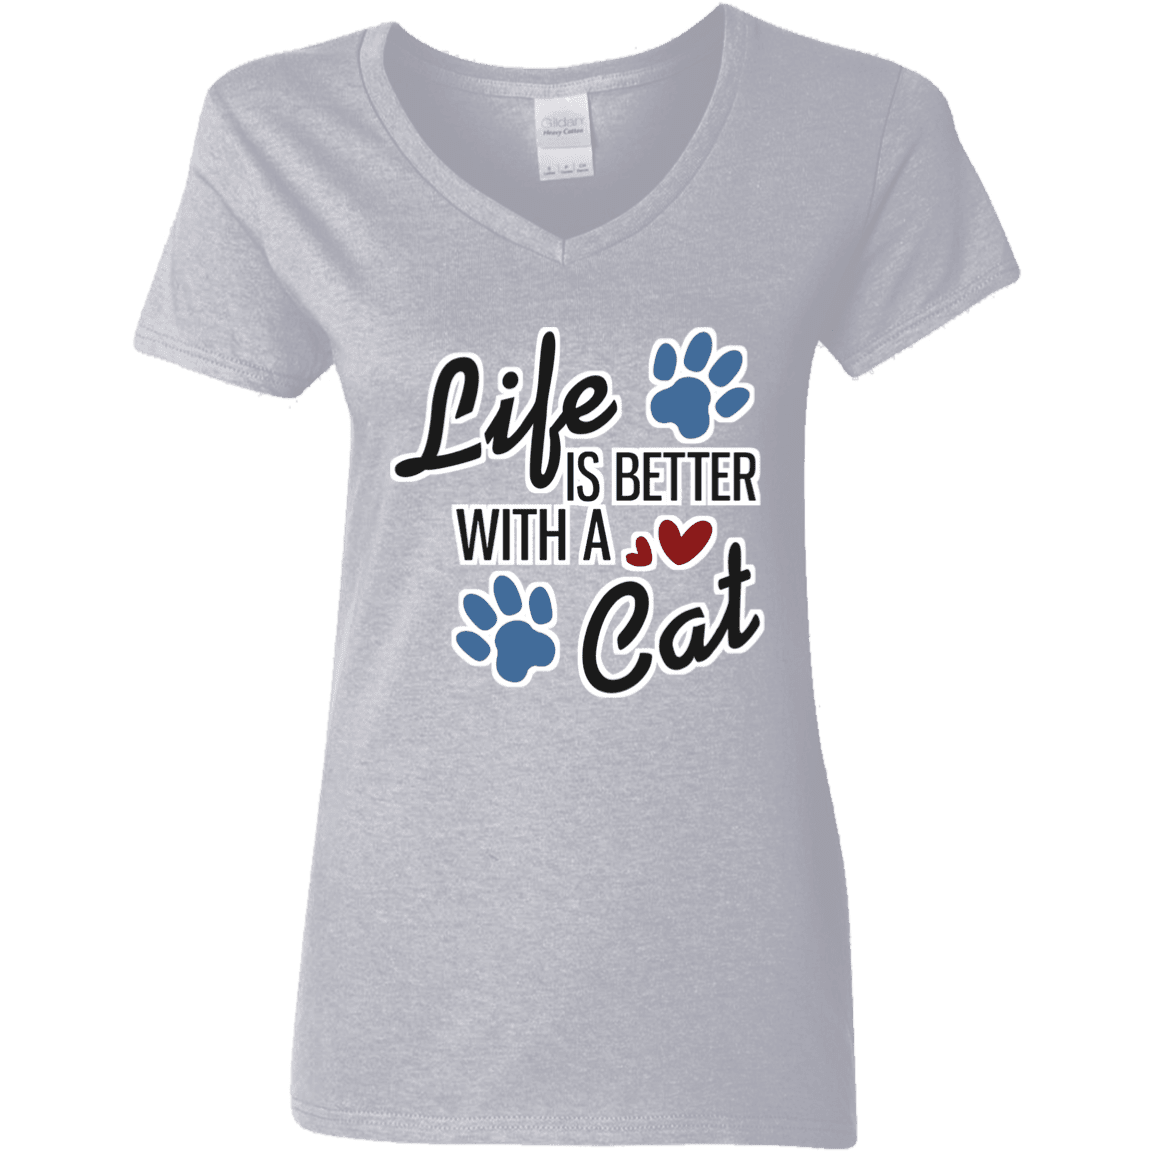 Life is Better with a Cat - Ladies V-Neck.